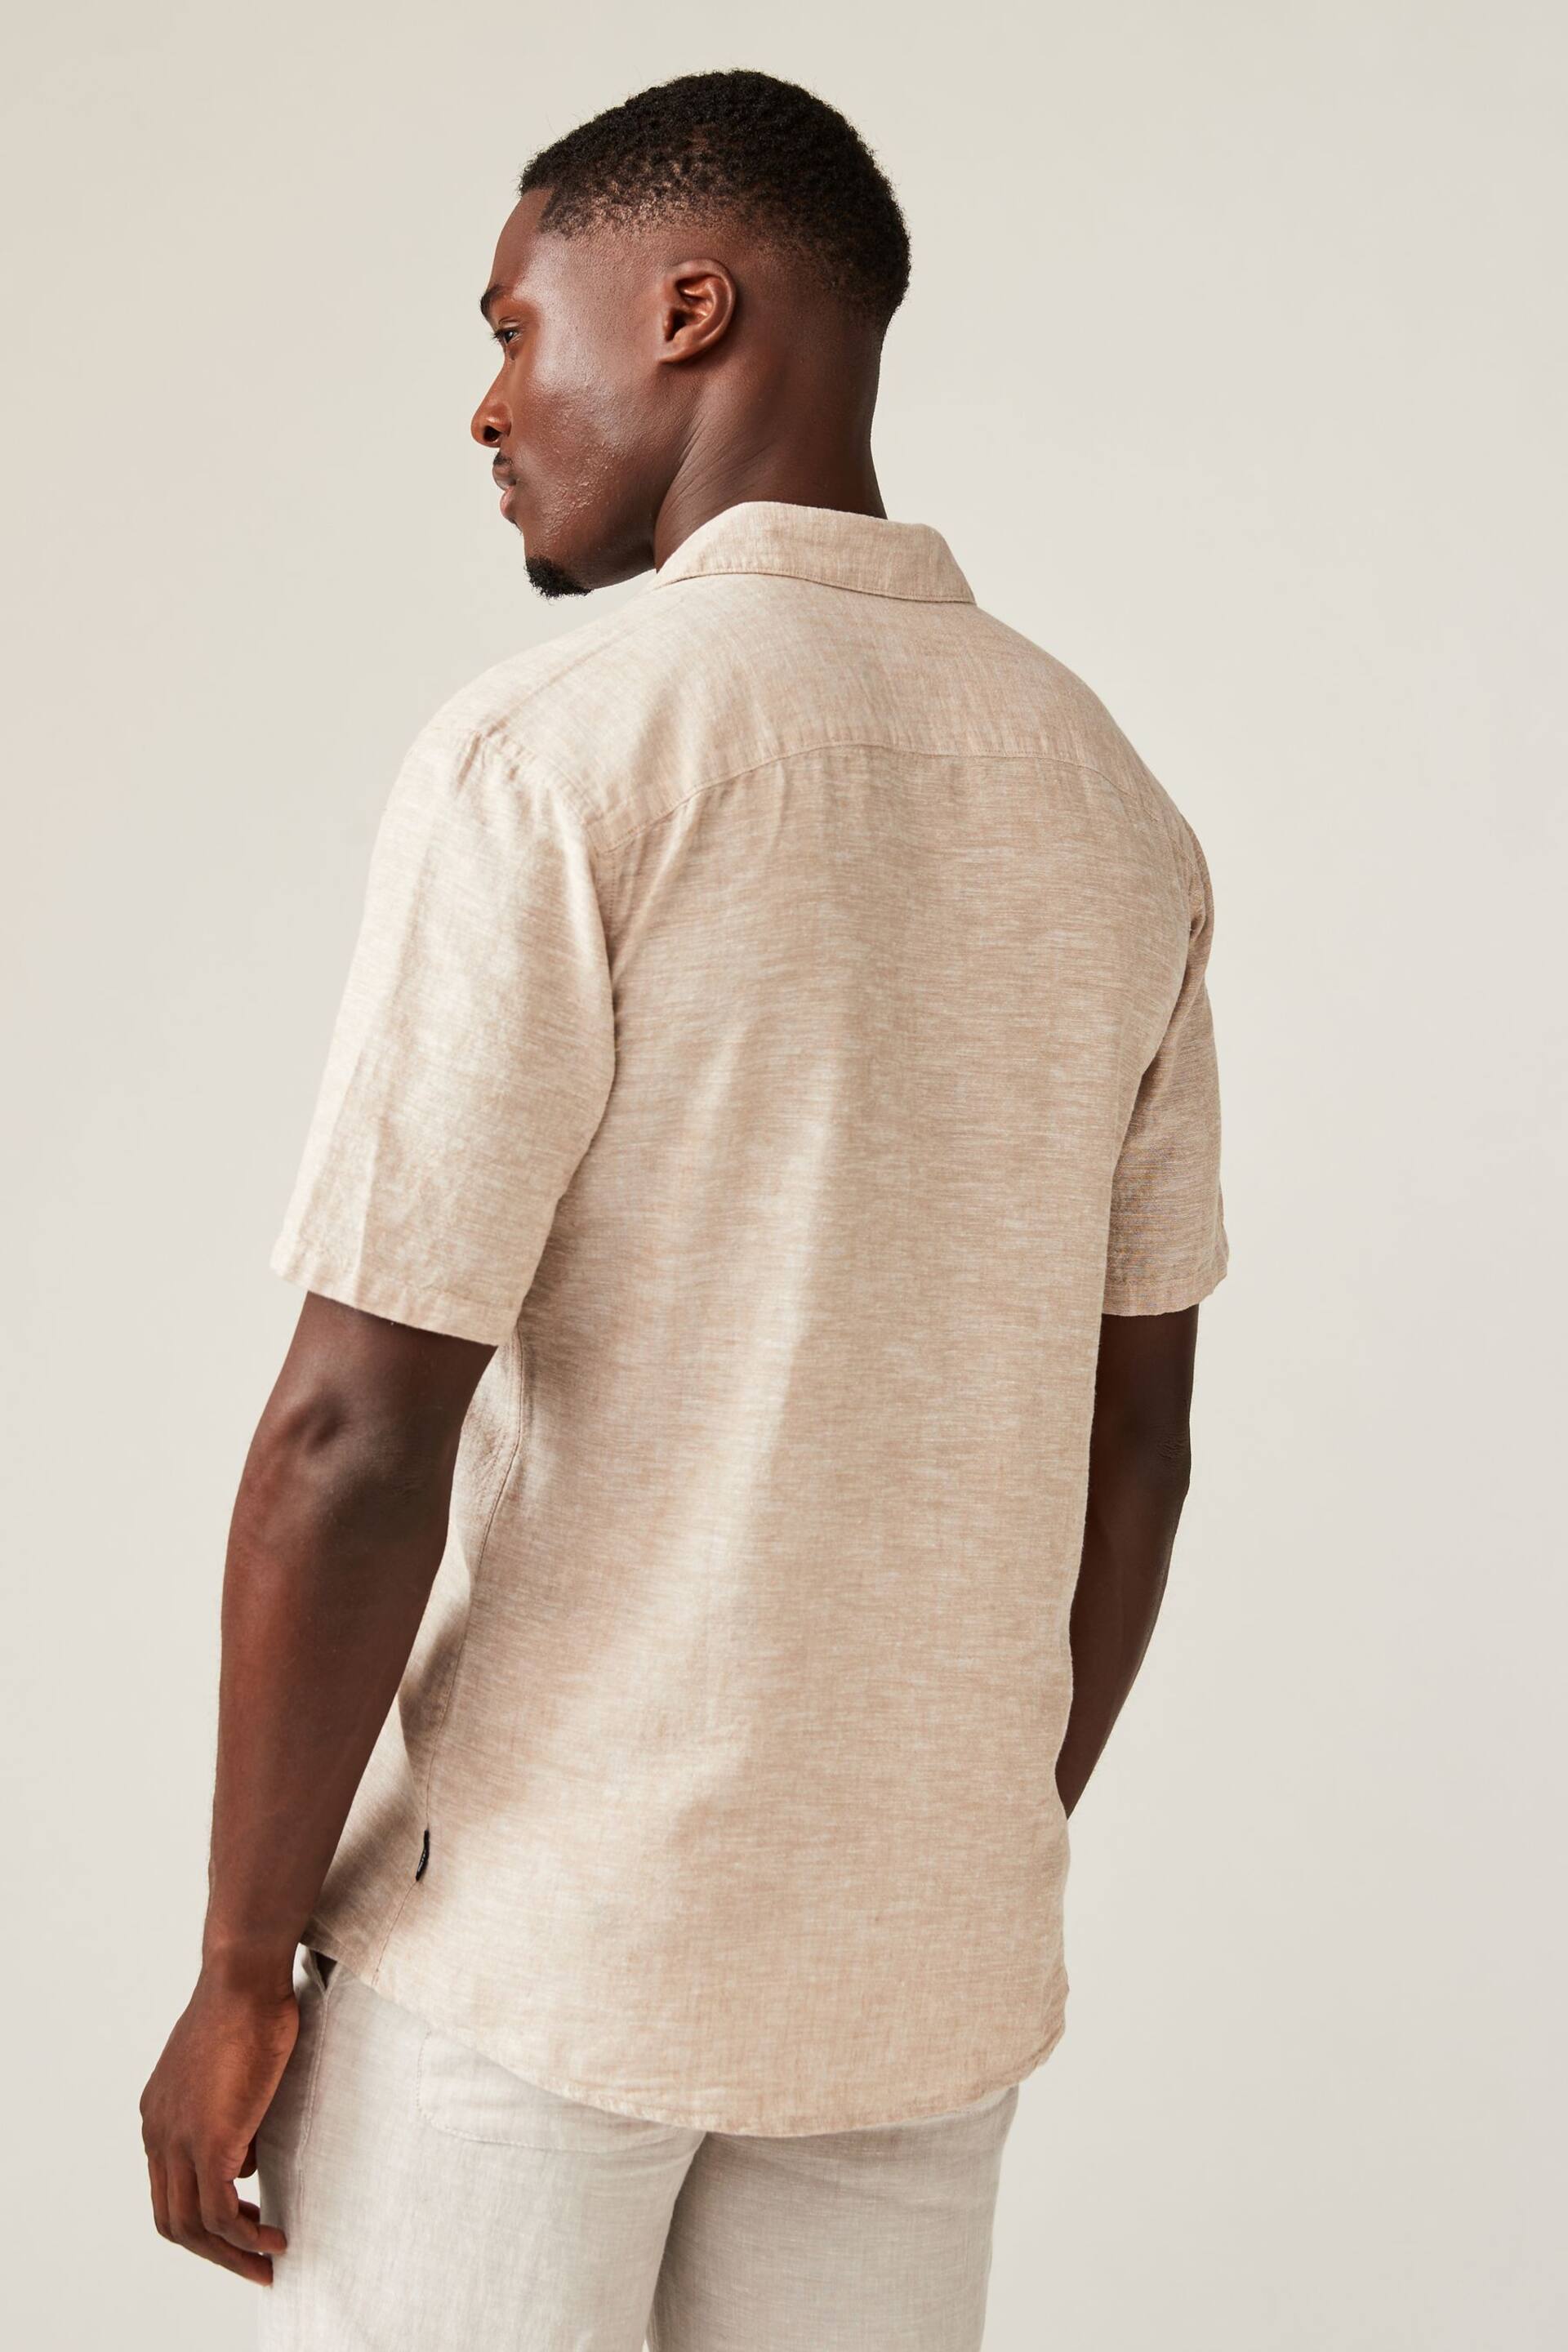 Only & Sons Grey Printed Linen Resort Shirt - Image 2 of 4